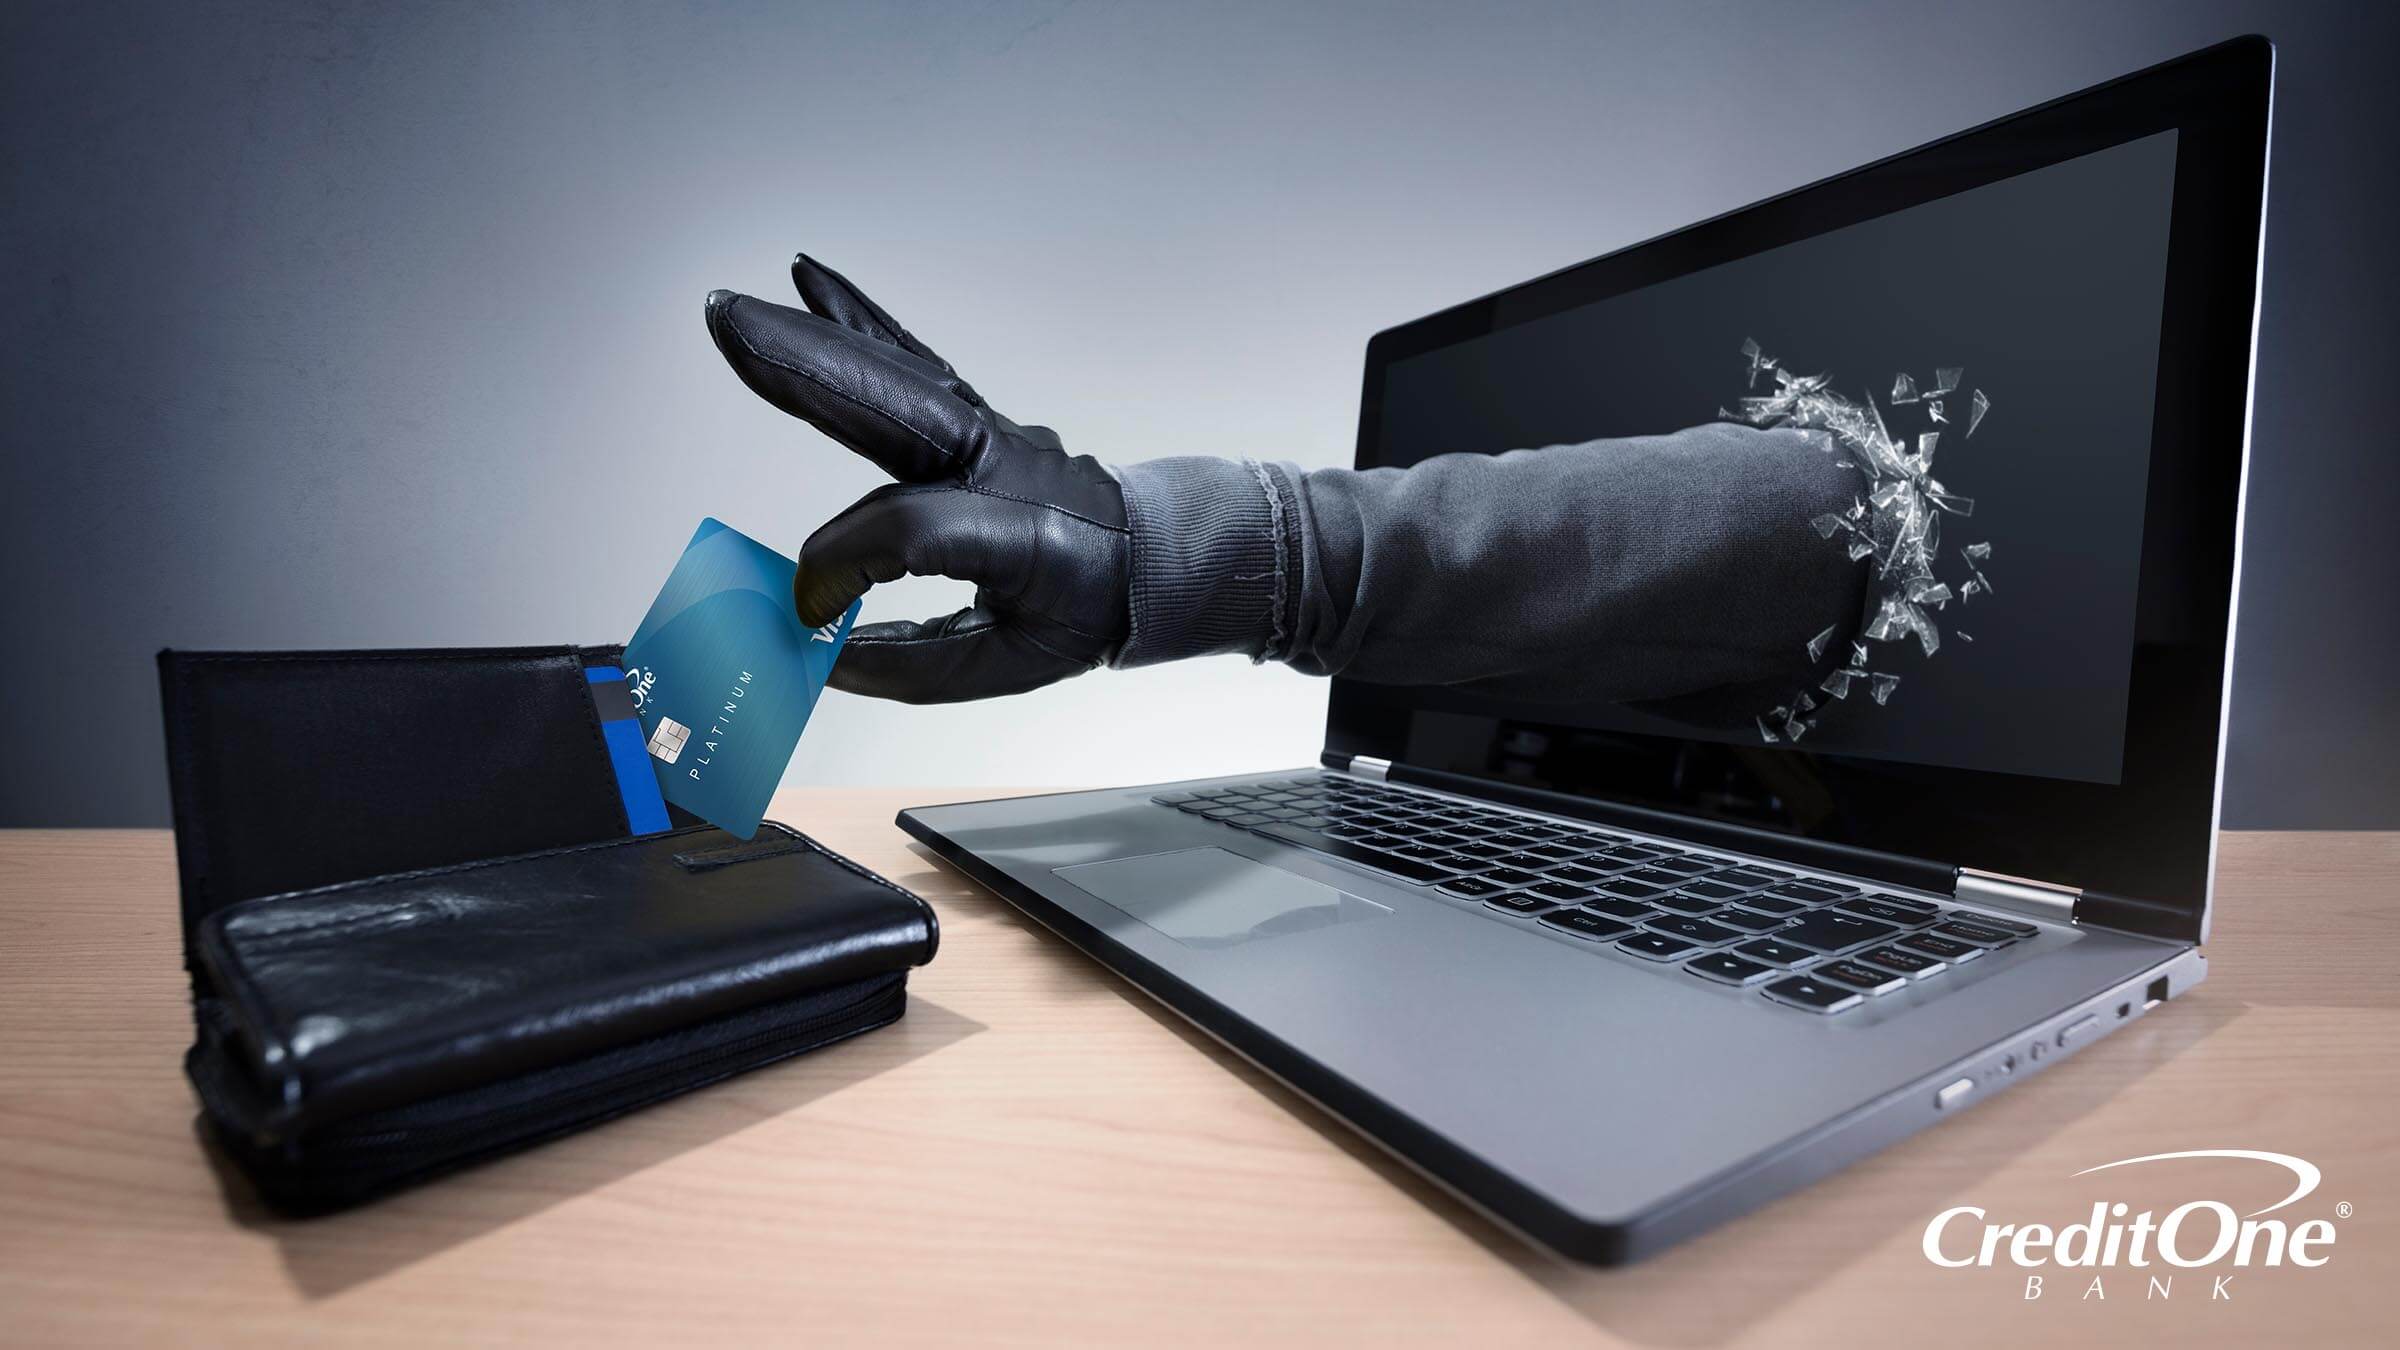 A credit card scammer reaching through a computer to steal from your wallet